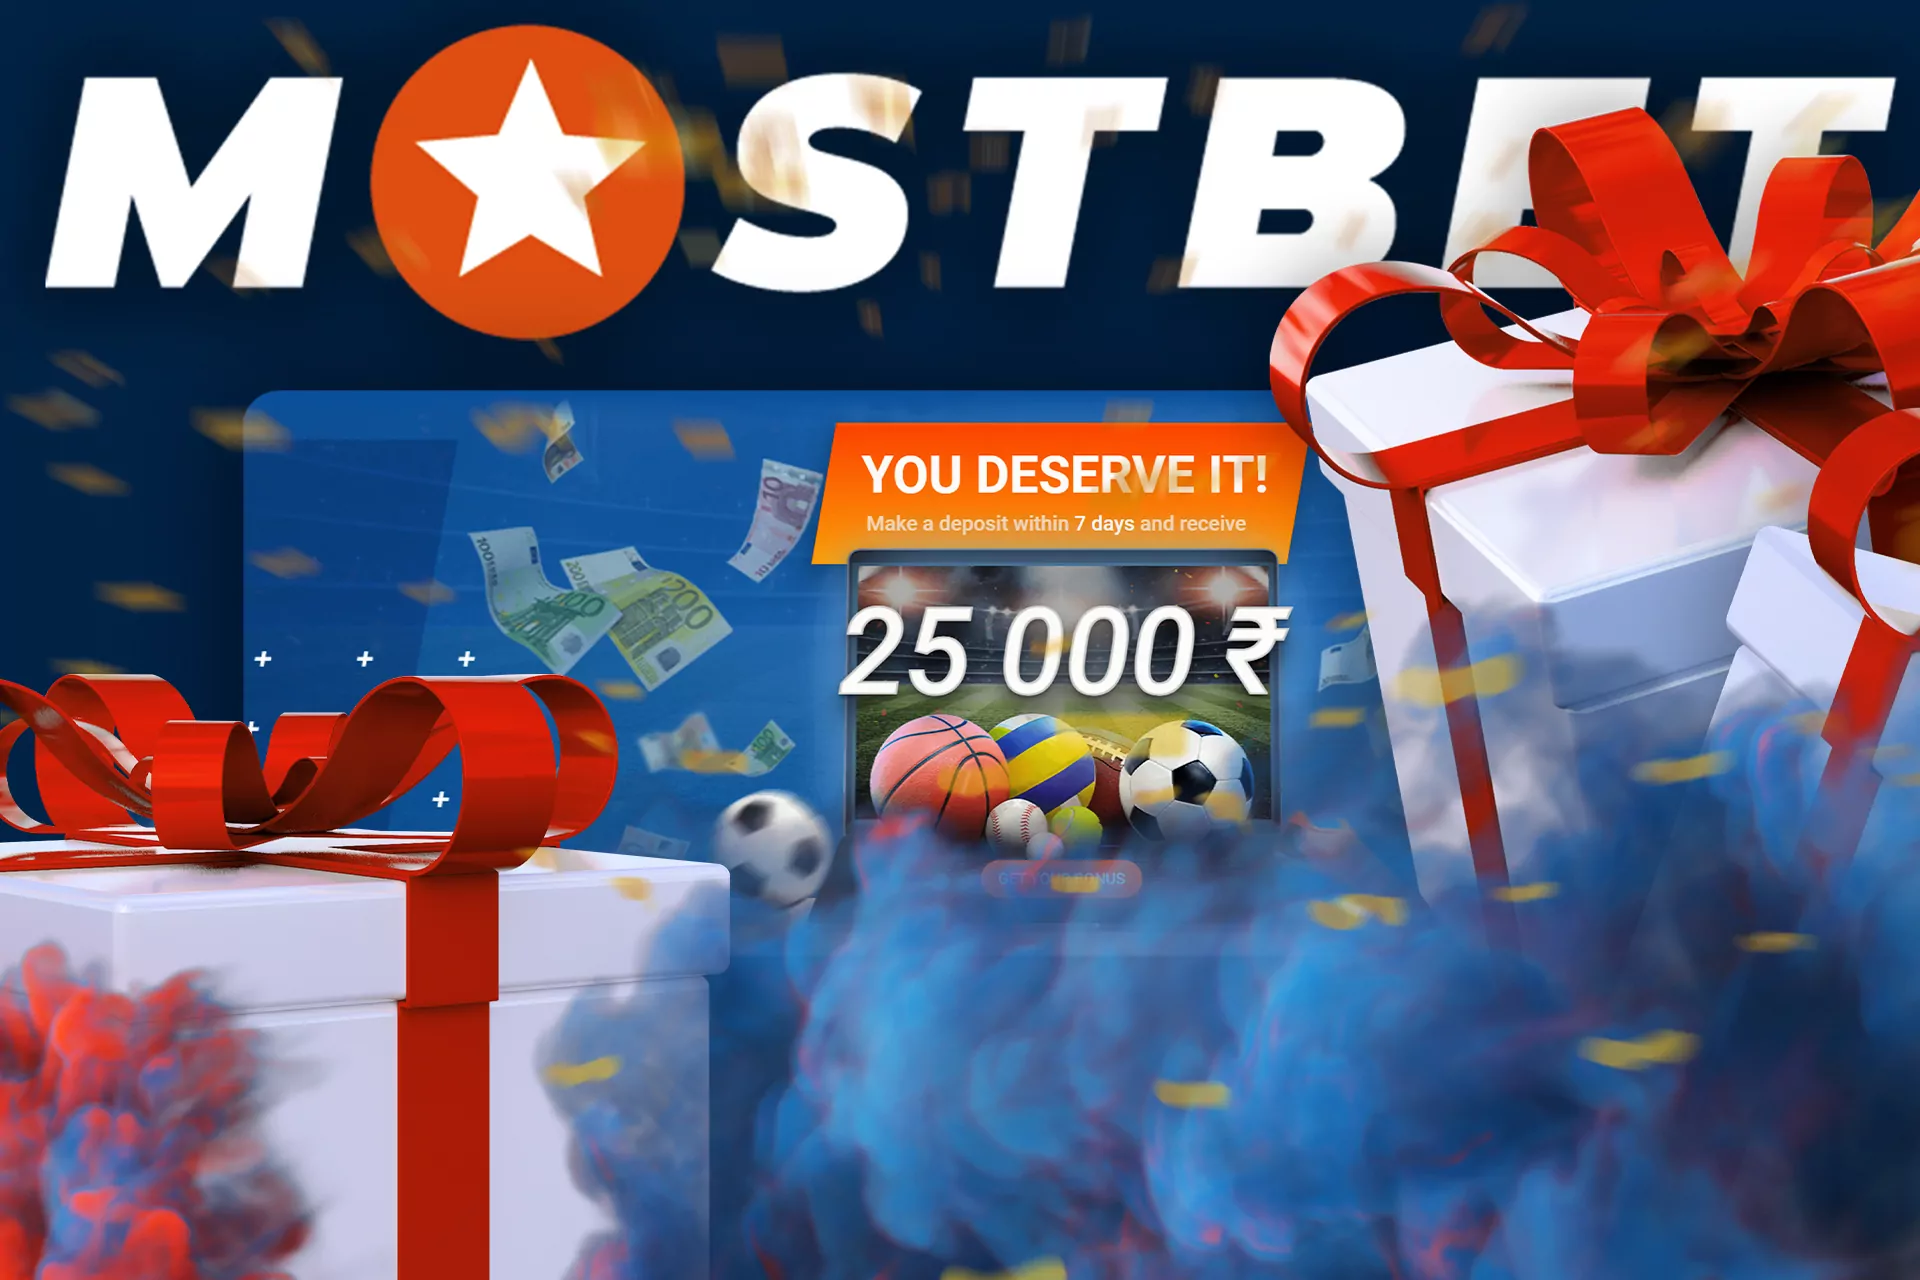 New users can get the first deposit bonus and spend in on slots or bets.